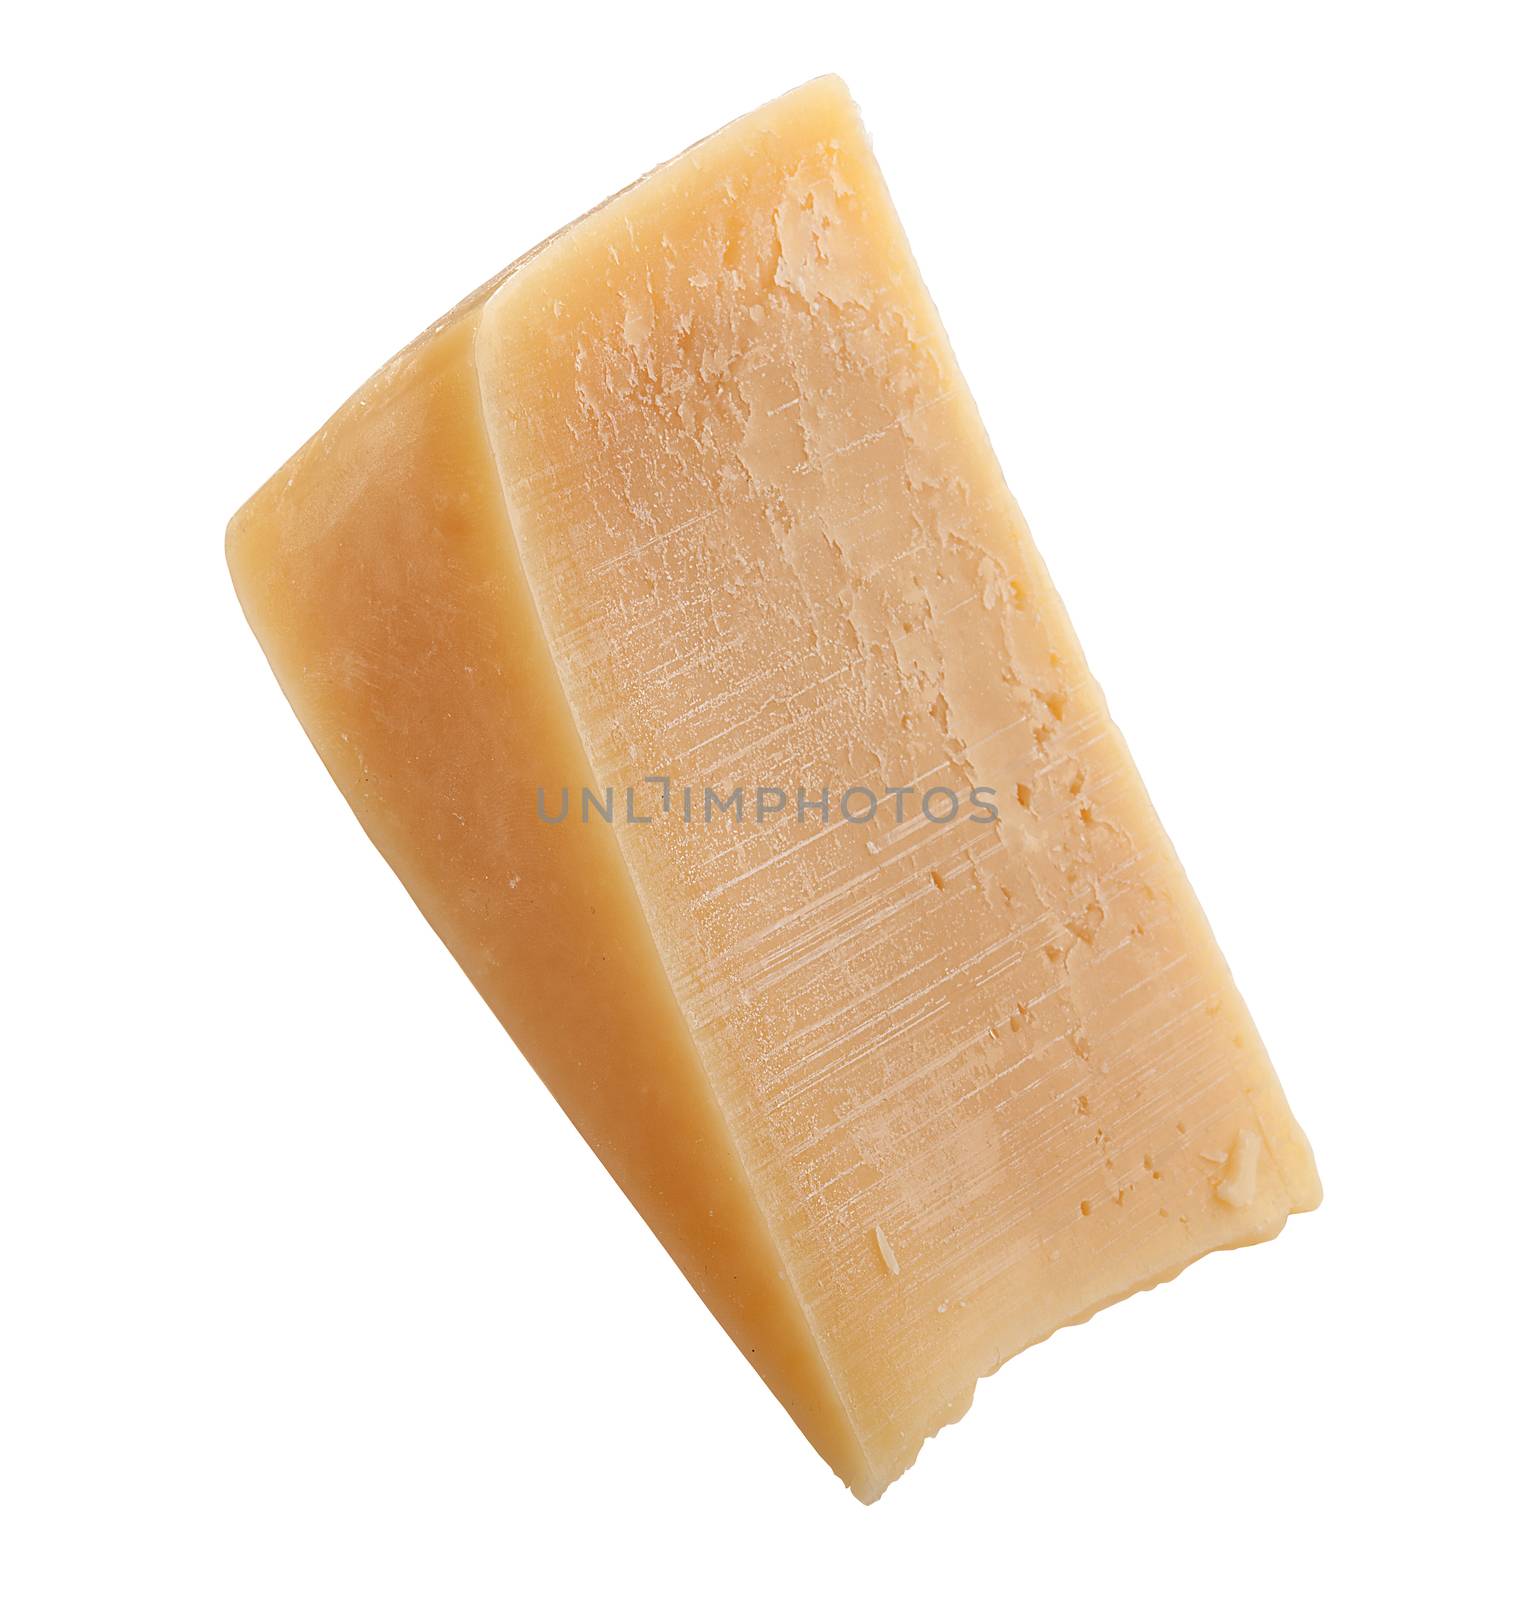 Slice of parmesan cheese by Angorius